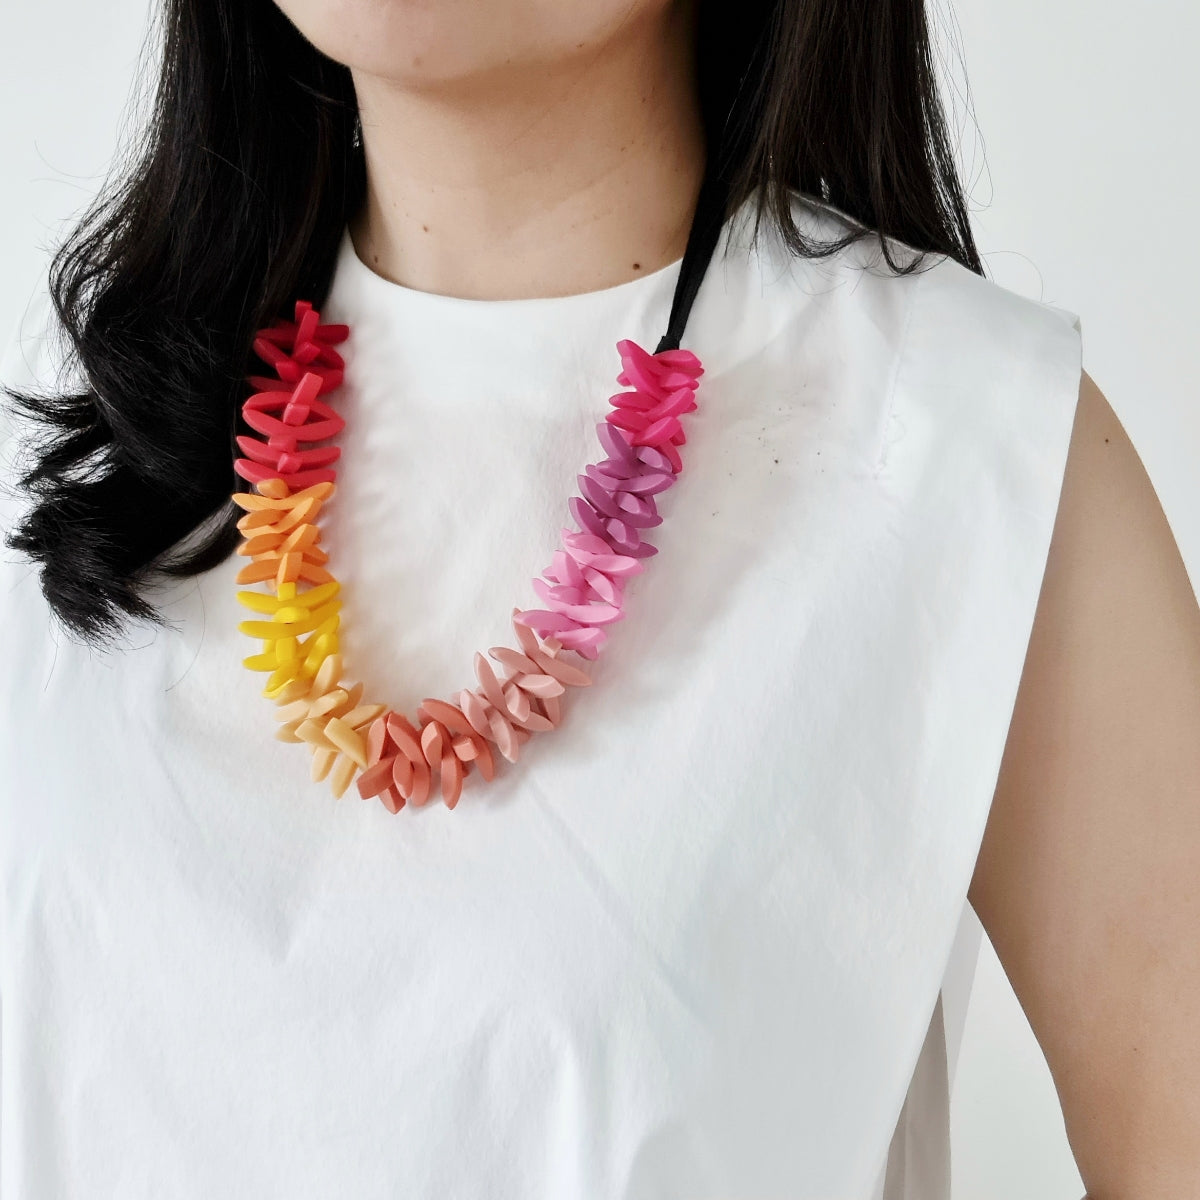 Jenna Ombre Red Necklace